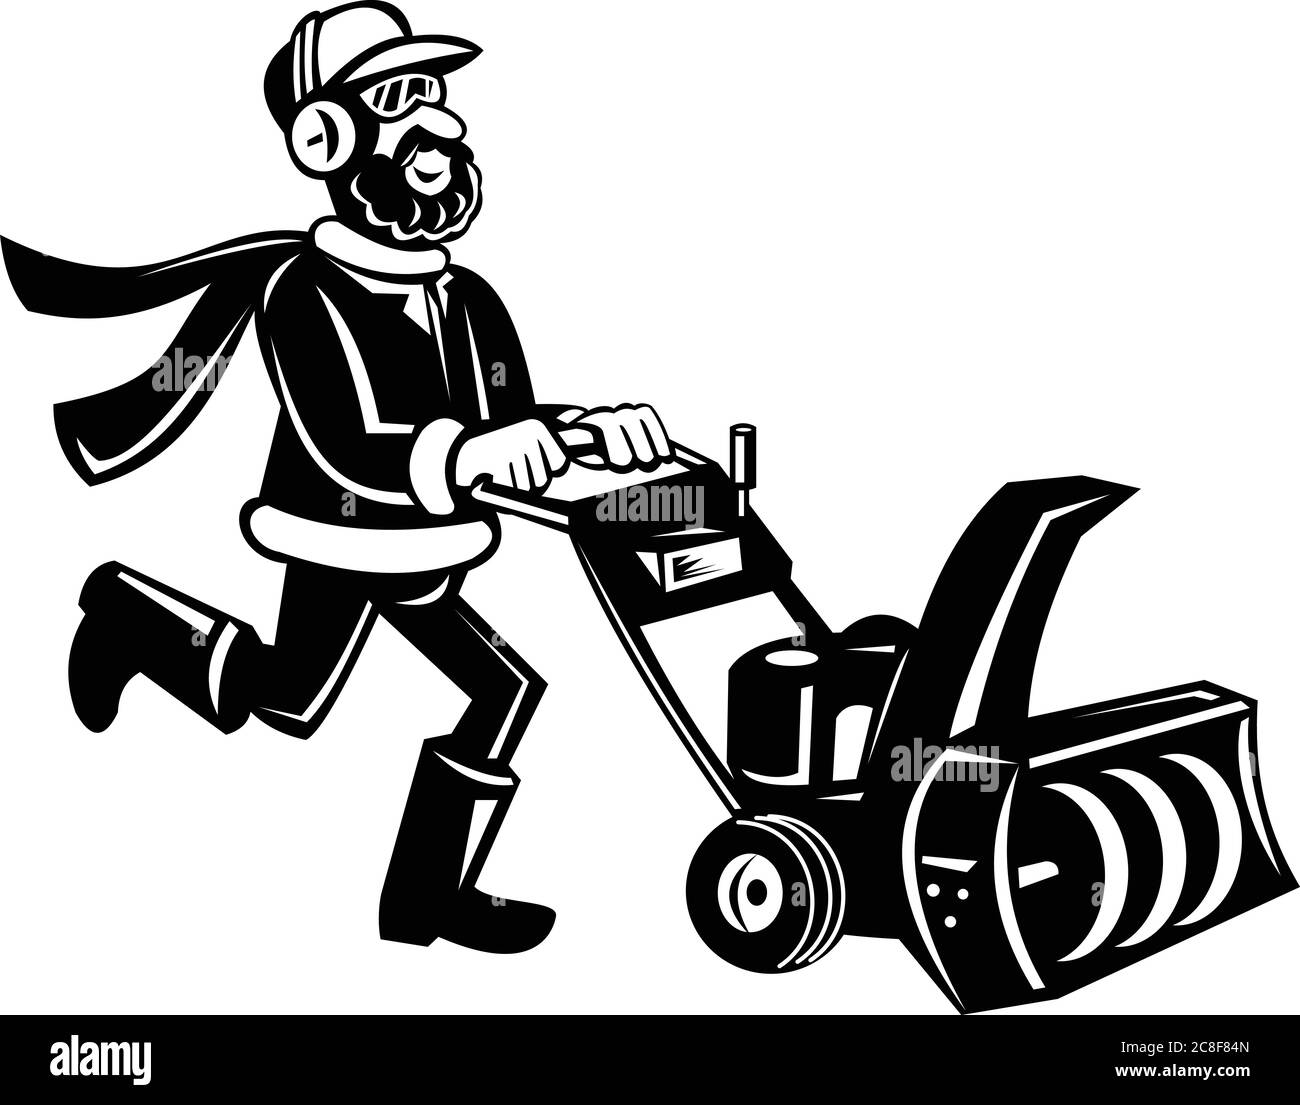 Retro black and white illustration of a man pushing a snow blower or snow thrower viewed from side on isolated white background done in cartoon style. Stock Vector